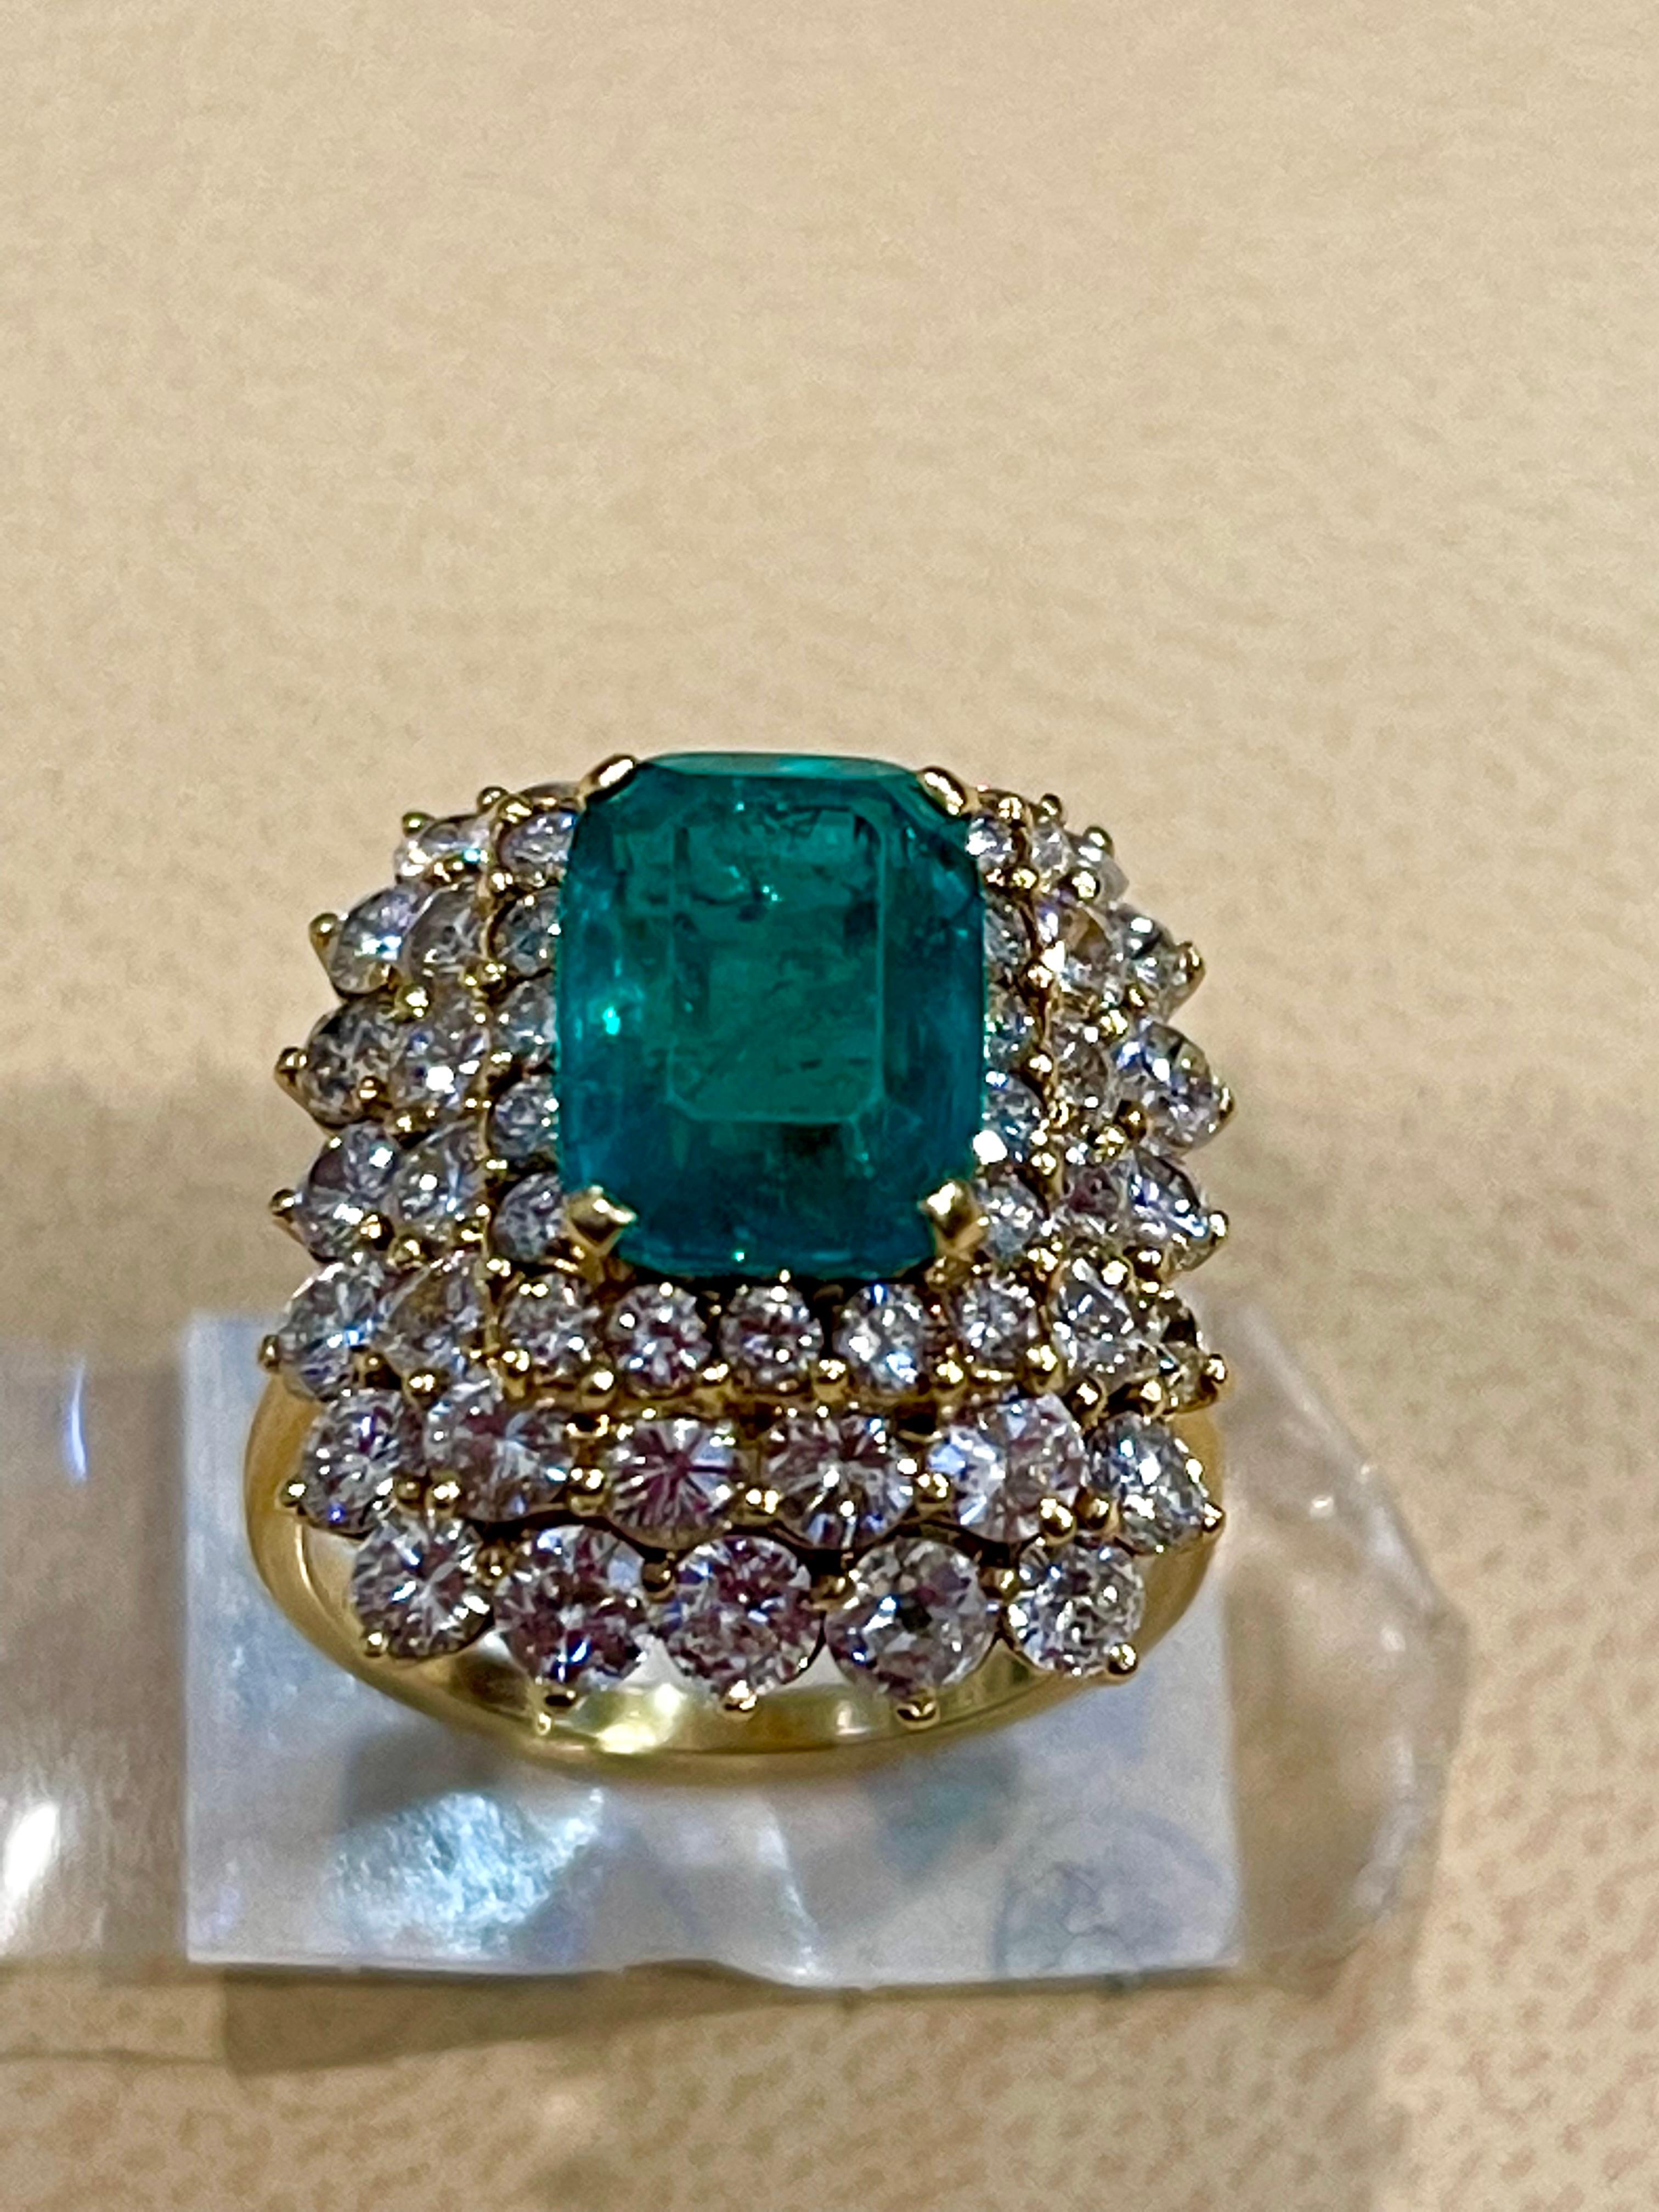 GIA Certified 3.41 Carat Cushion Cut Colombian Emerald & Diamond Ring 18K Y Gold In Excellent Condition For Sale In New York, NY